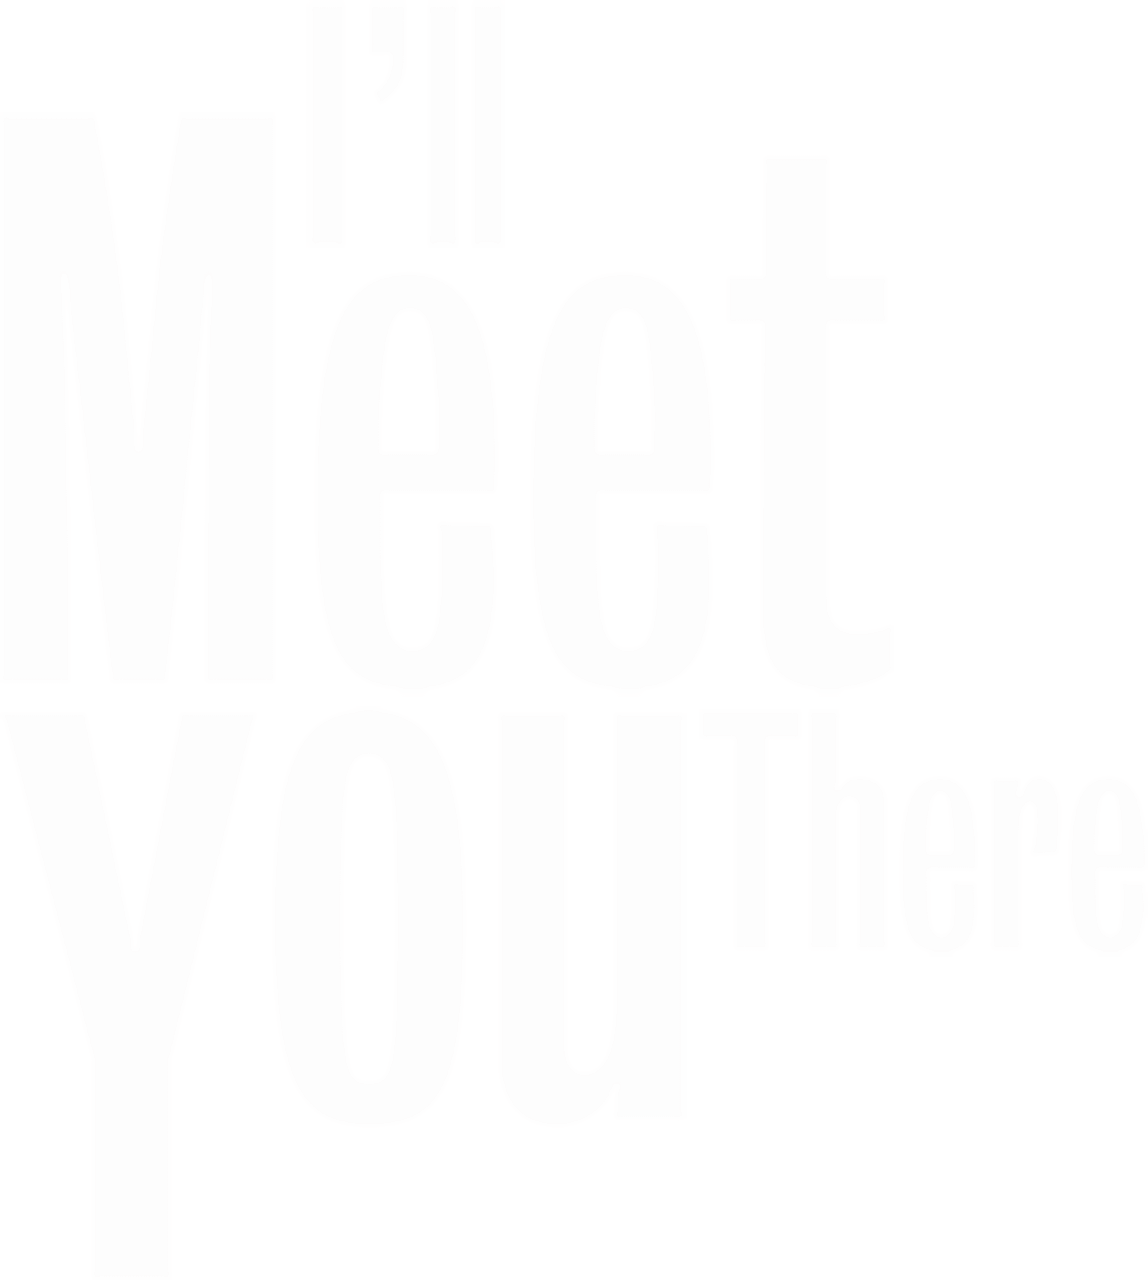 I'll Meet You There logo